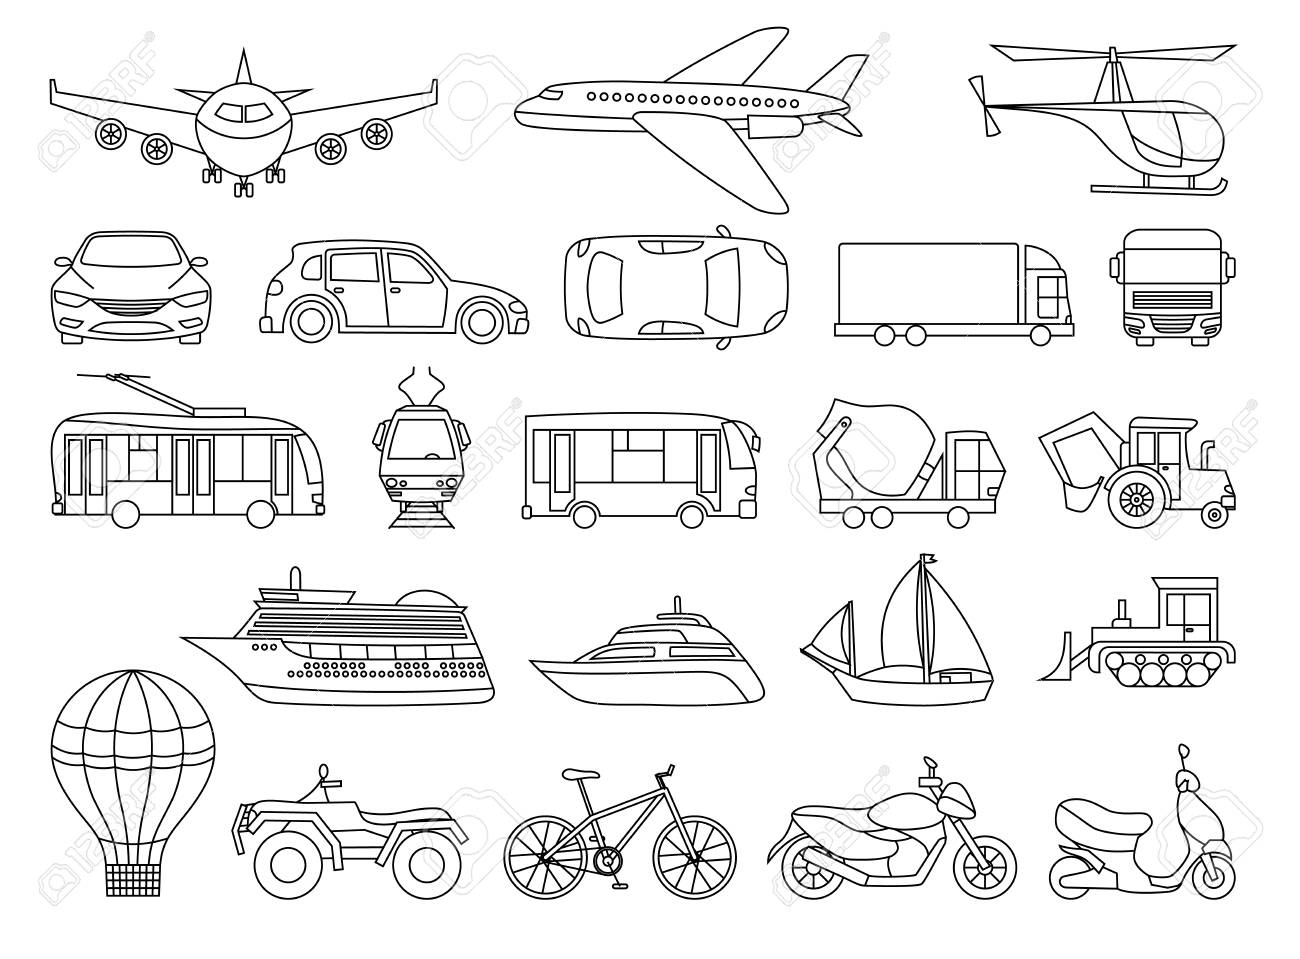 Toy transport set to be colored coloring book to educate kids learn colors visual educational game easy kid gaming and primary education simple level of difficulty coloring pages royalty free svg cliparts